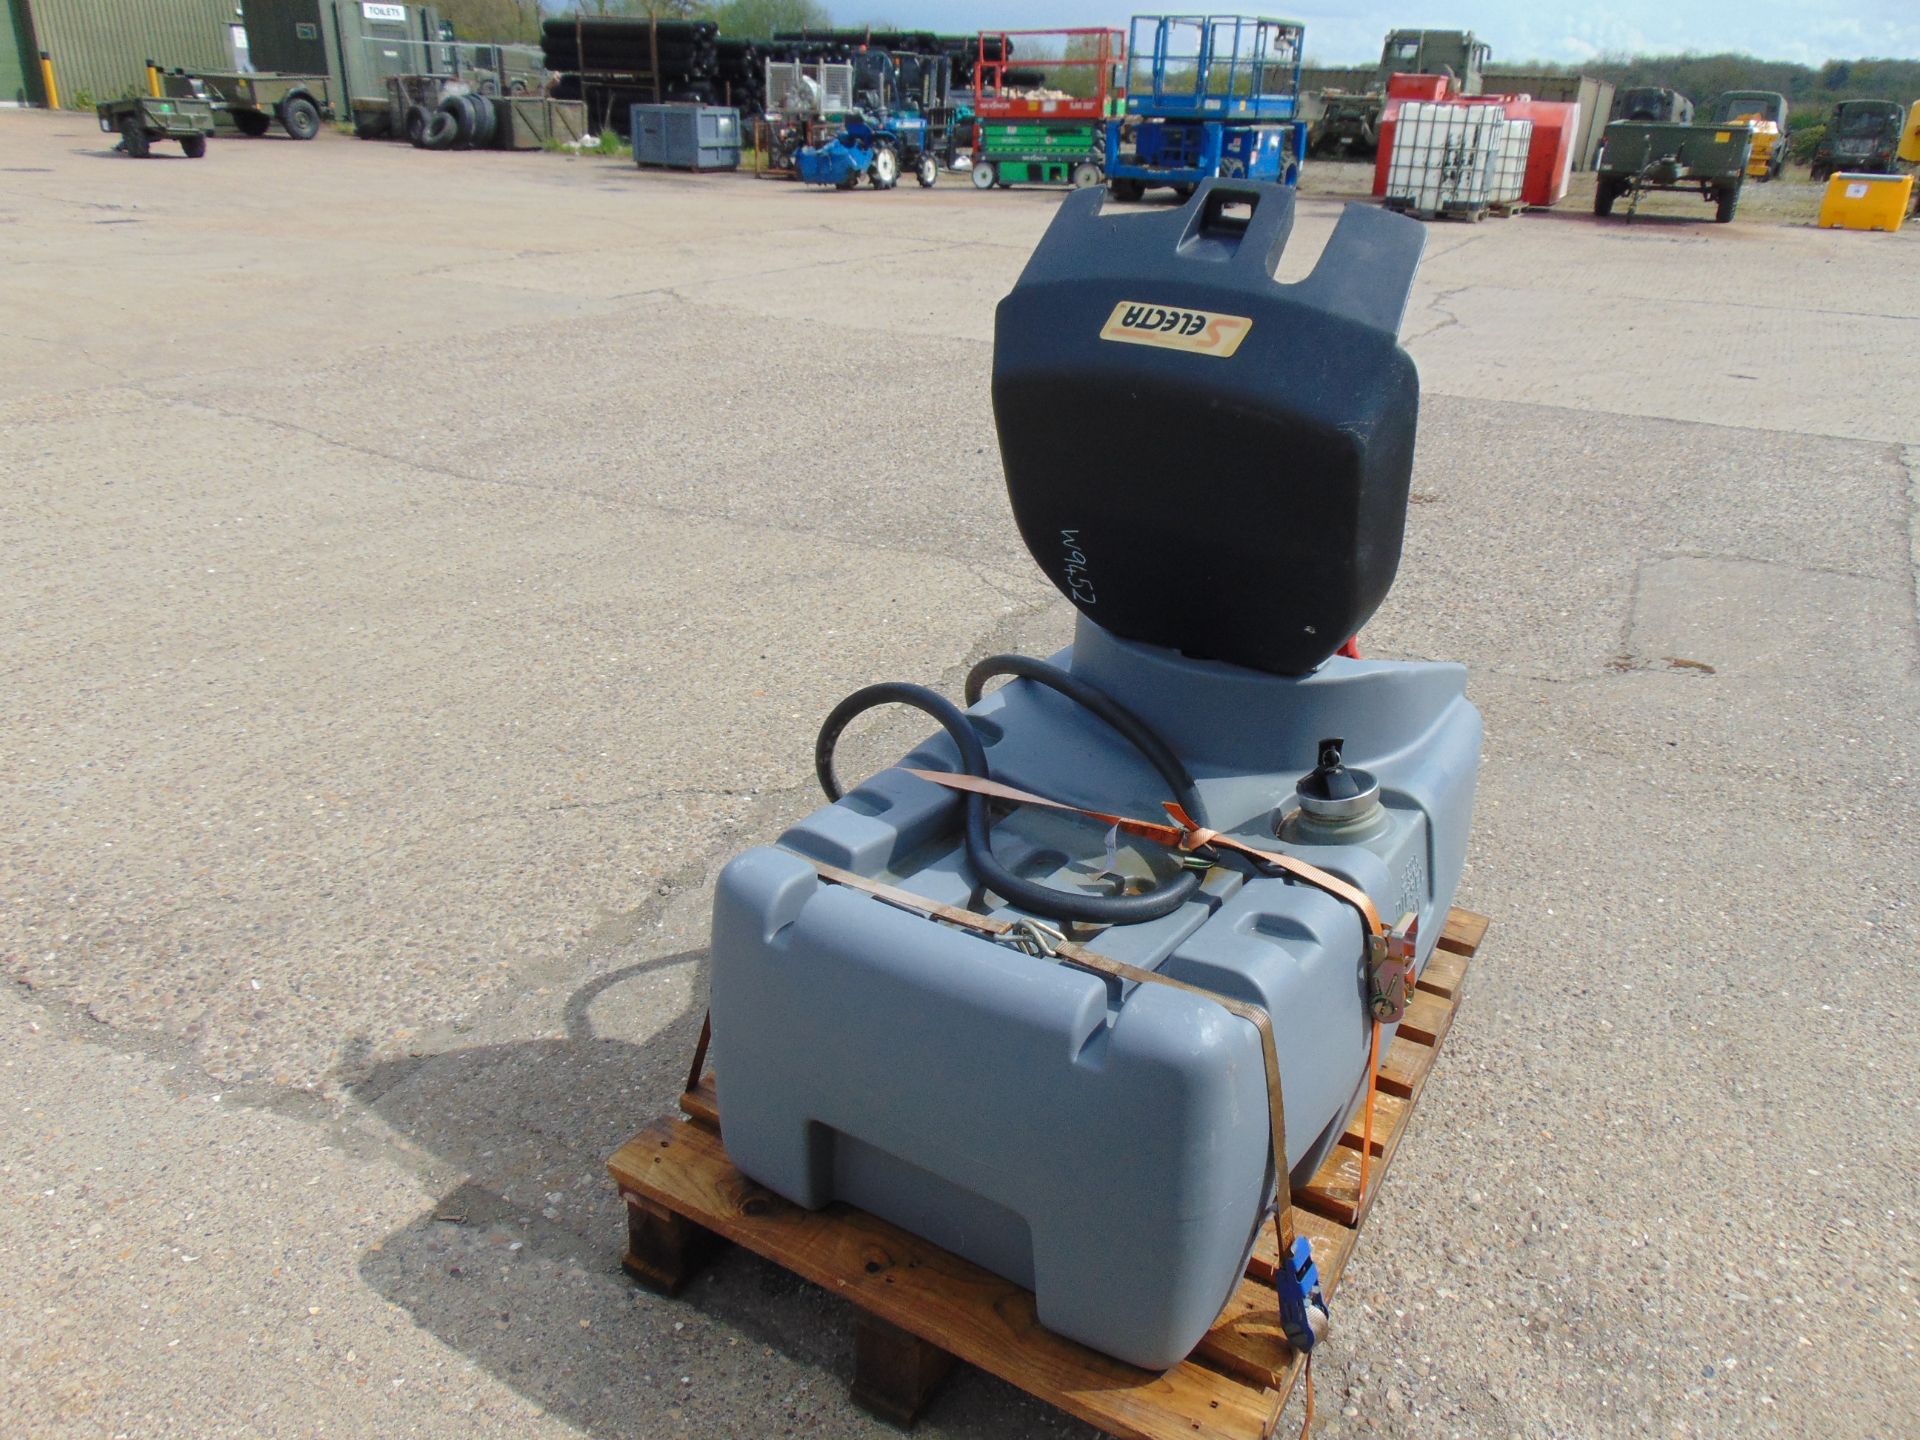 Selecta 200 Litre 50 Gall Portable Refuel Tank c/w 12Volt Pump Hose and Automatic Refuelling Nozzle - Image 6 of 14